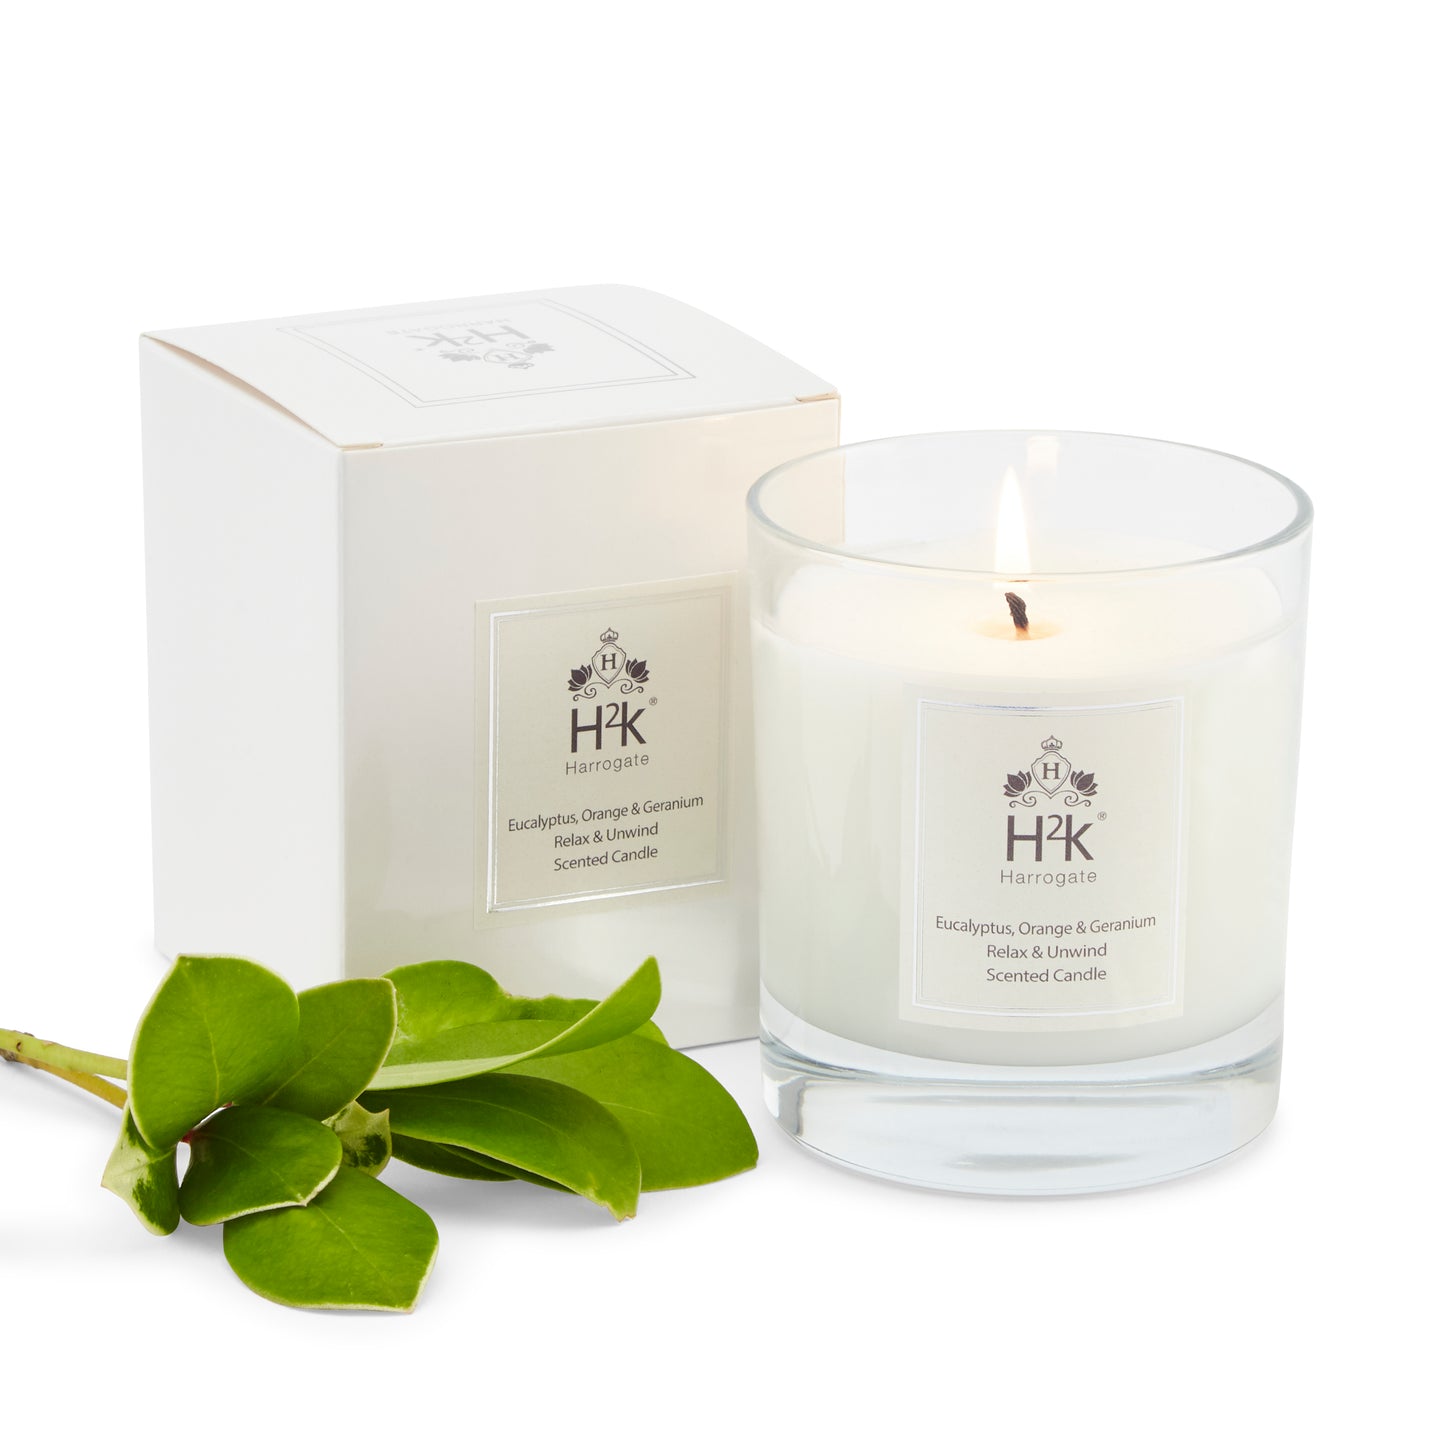 Well-being and Uplifting Eucalyptus Orange and Geranium Candle.